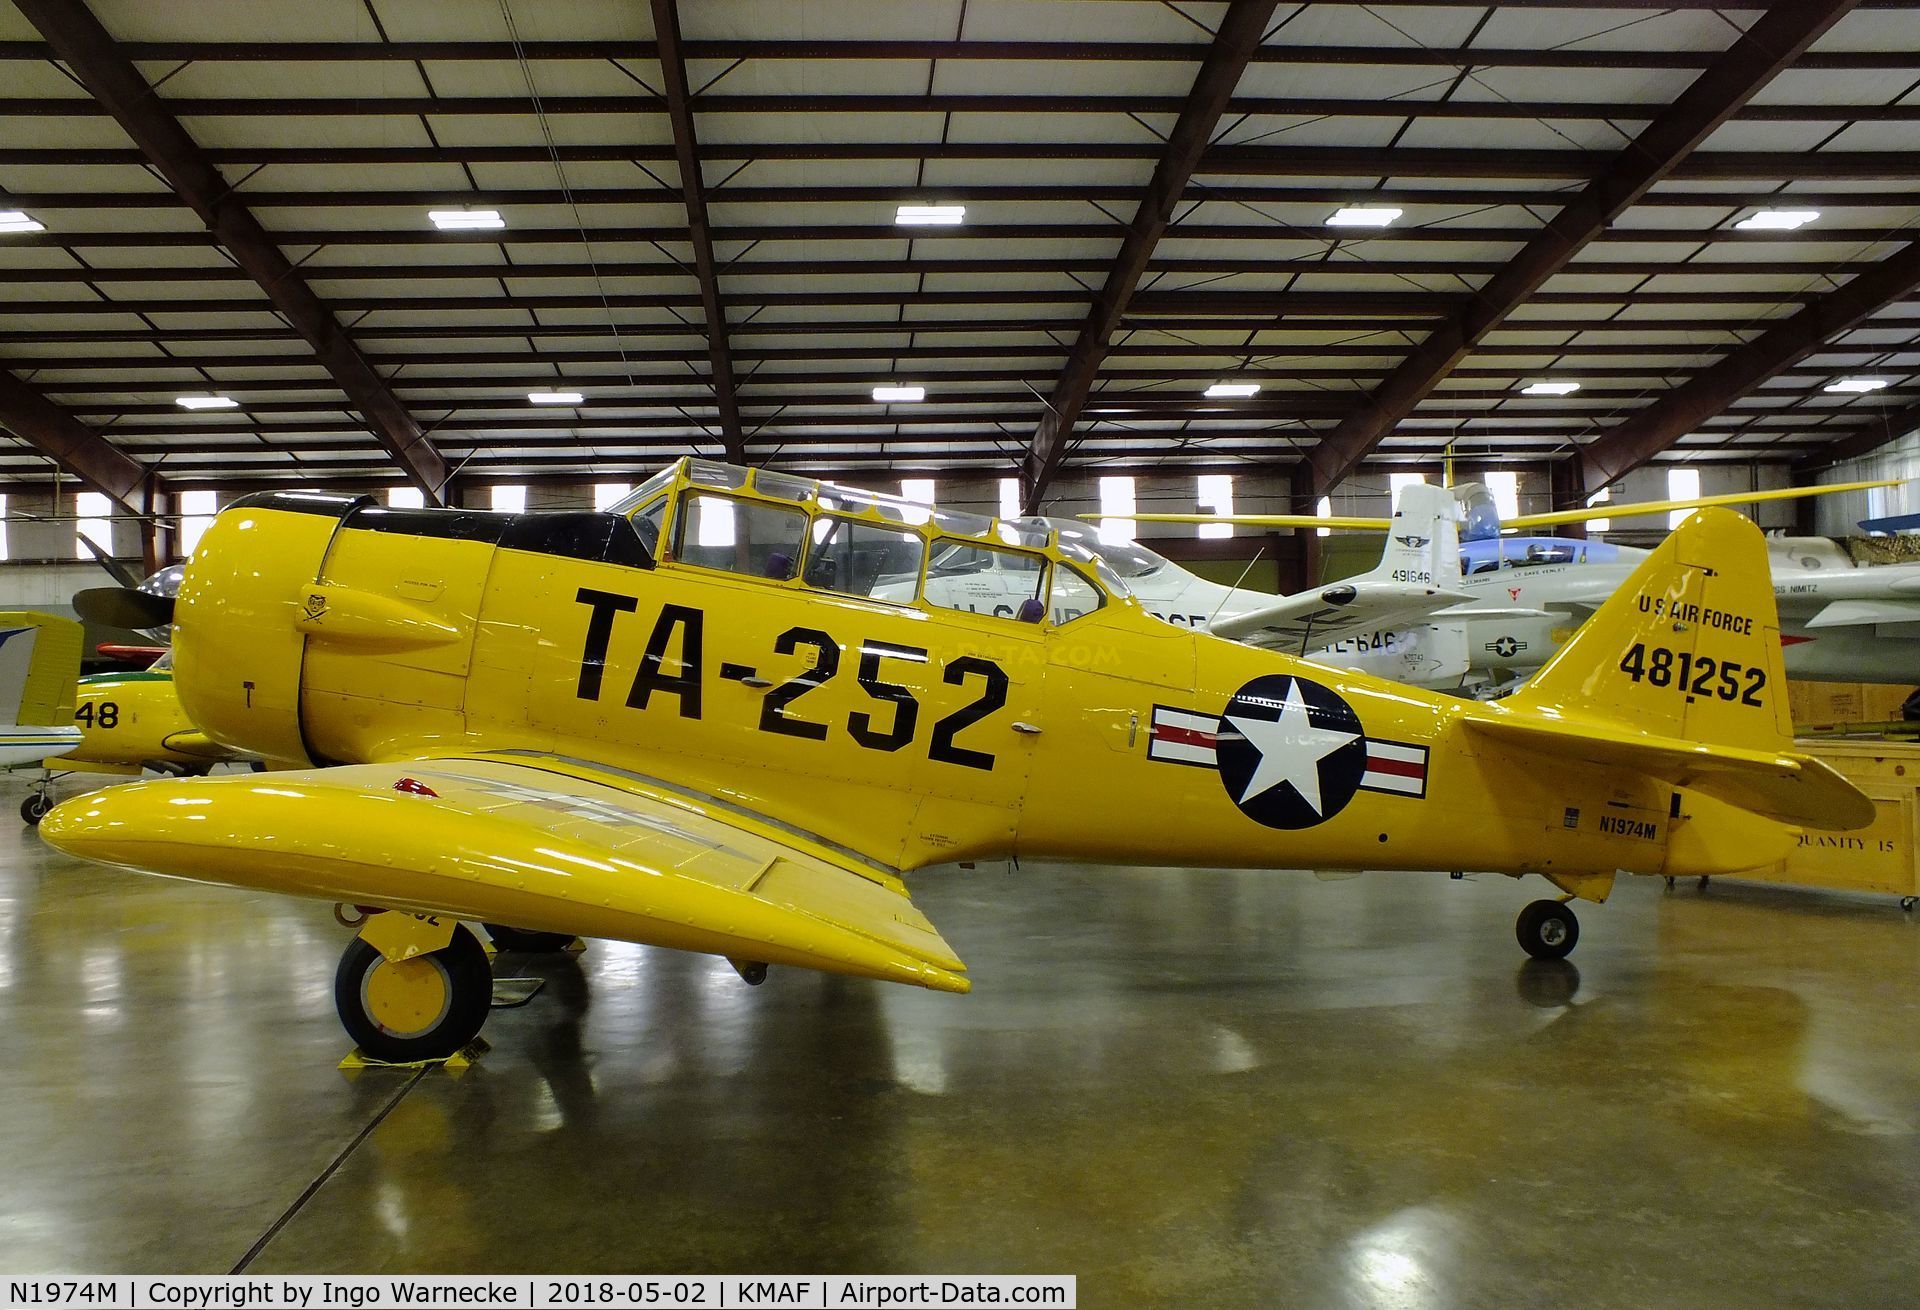 N1974M, North American AT-6D C/N 44-81252, North American AT-6D Texan at the Midland Army Air Field Museum, Midland TX